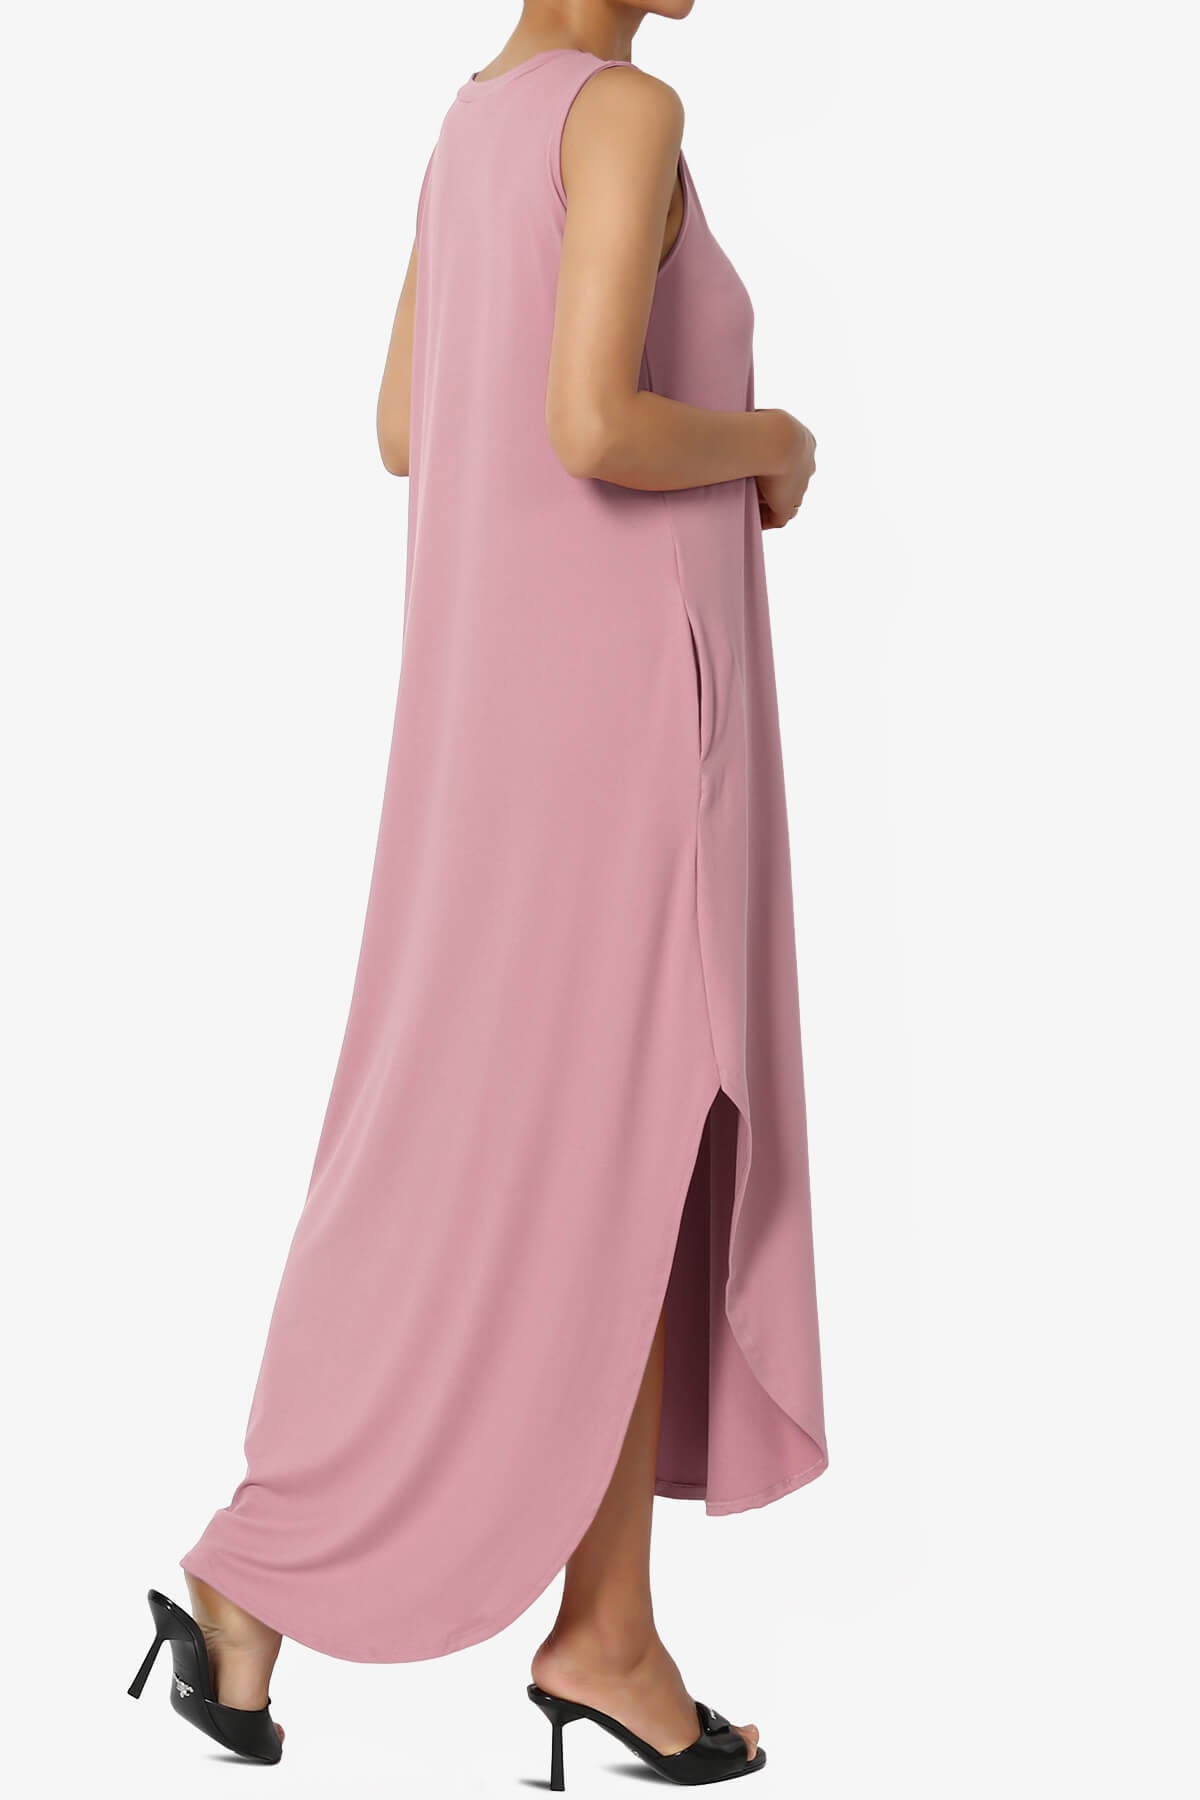 Load image into Gallery viewer, Rozlyn Sleeveless Slit Maxi Dress LIGHT ROSE_4
